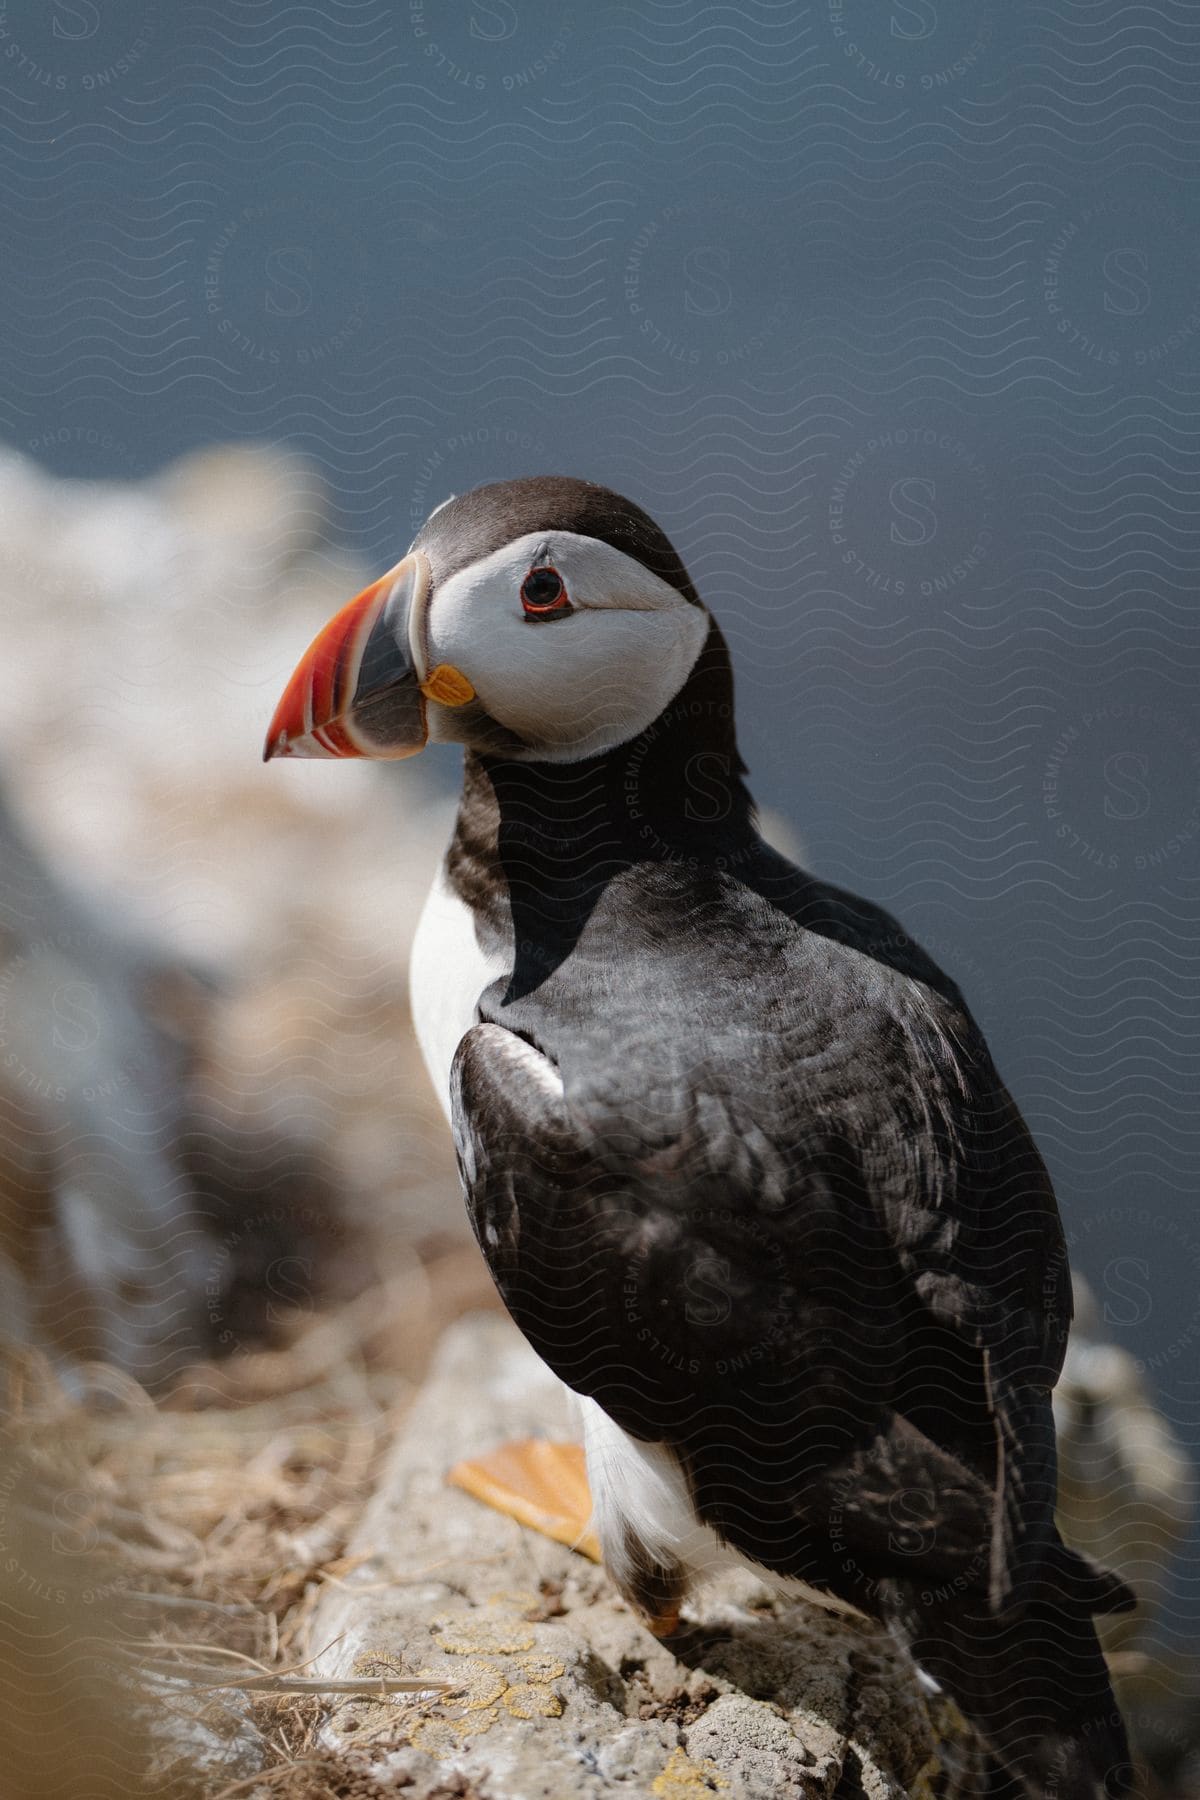 A puffin in its nest in the wild during the day.